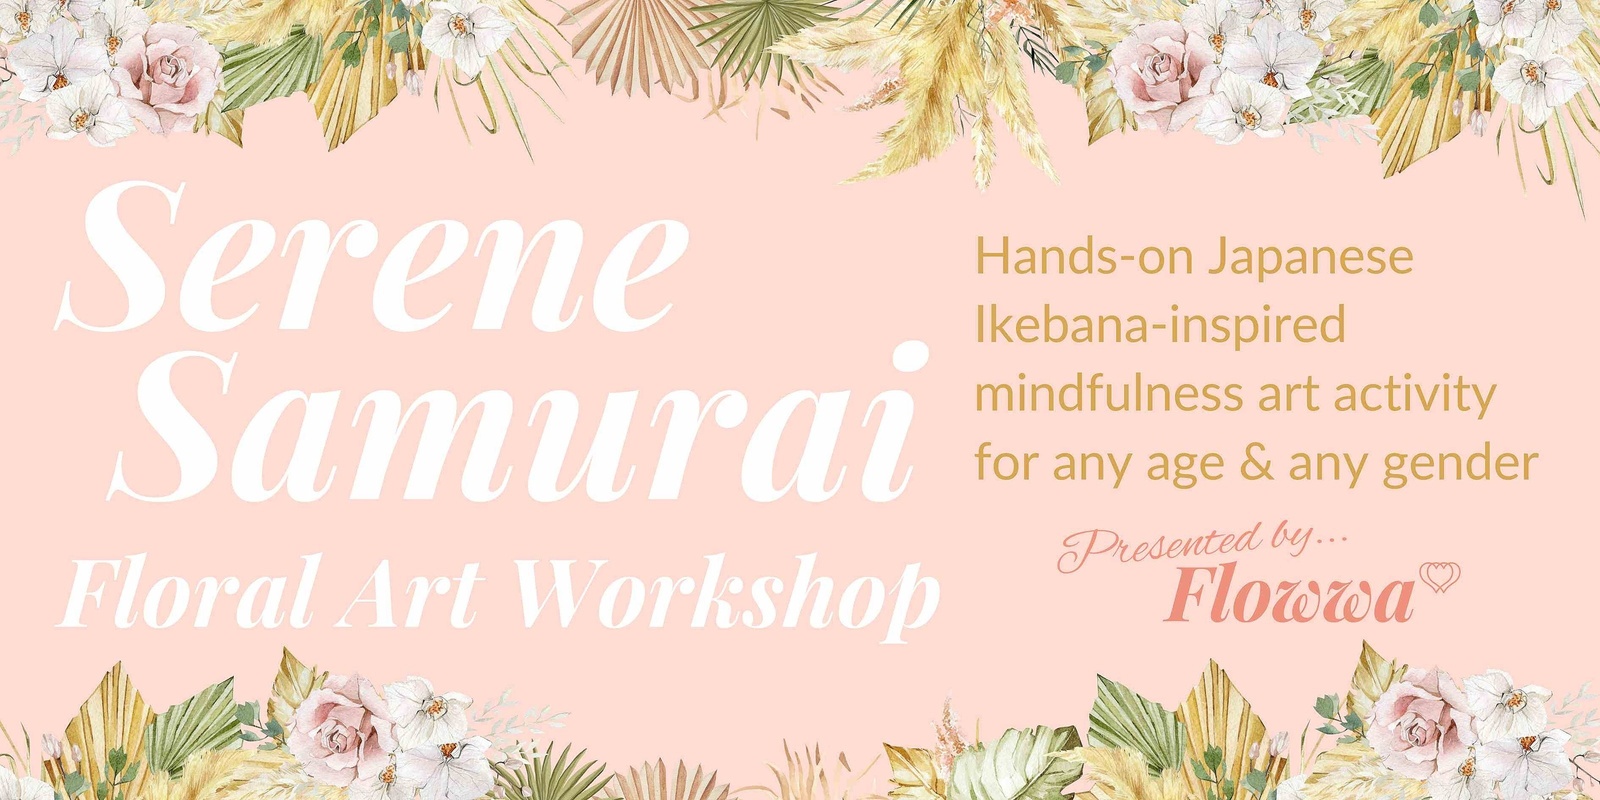 Banner image for Serene Samurai Floral Art Workshop| Family Fun Holiday Activities 